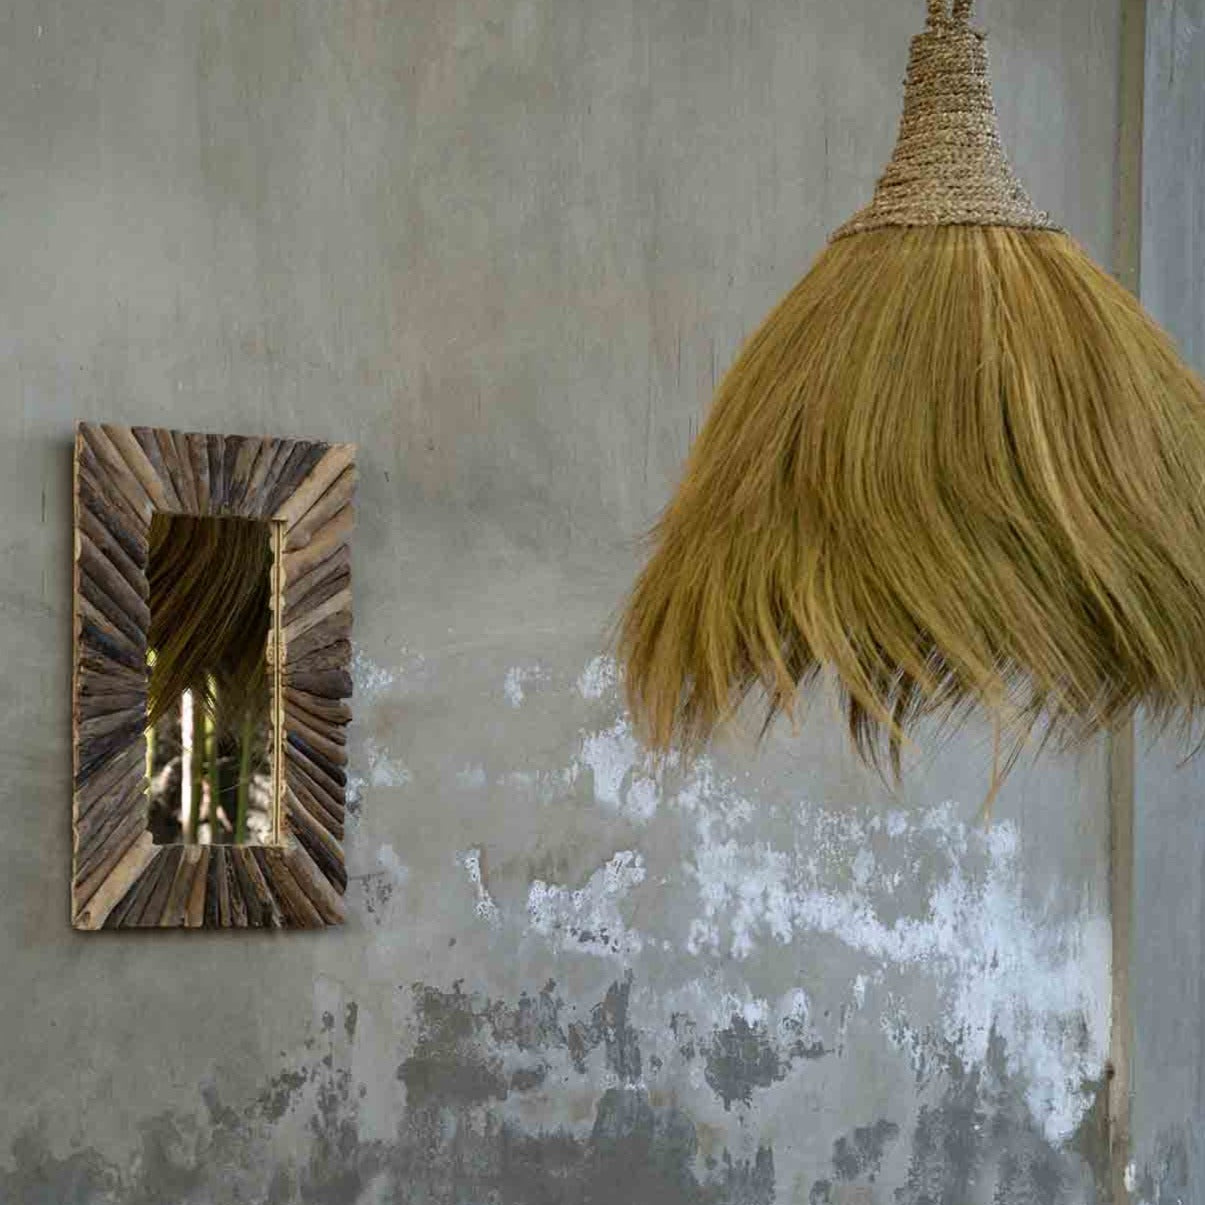 THE MAKIKI Pendant Lamp interior view, with mirror on the wall